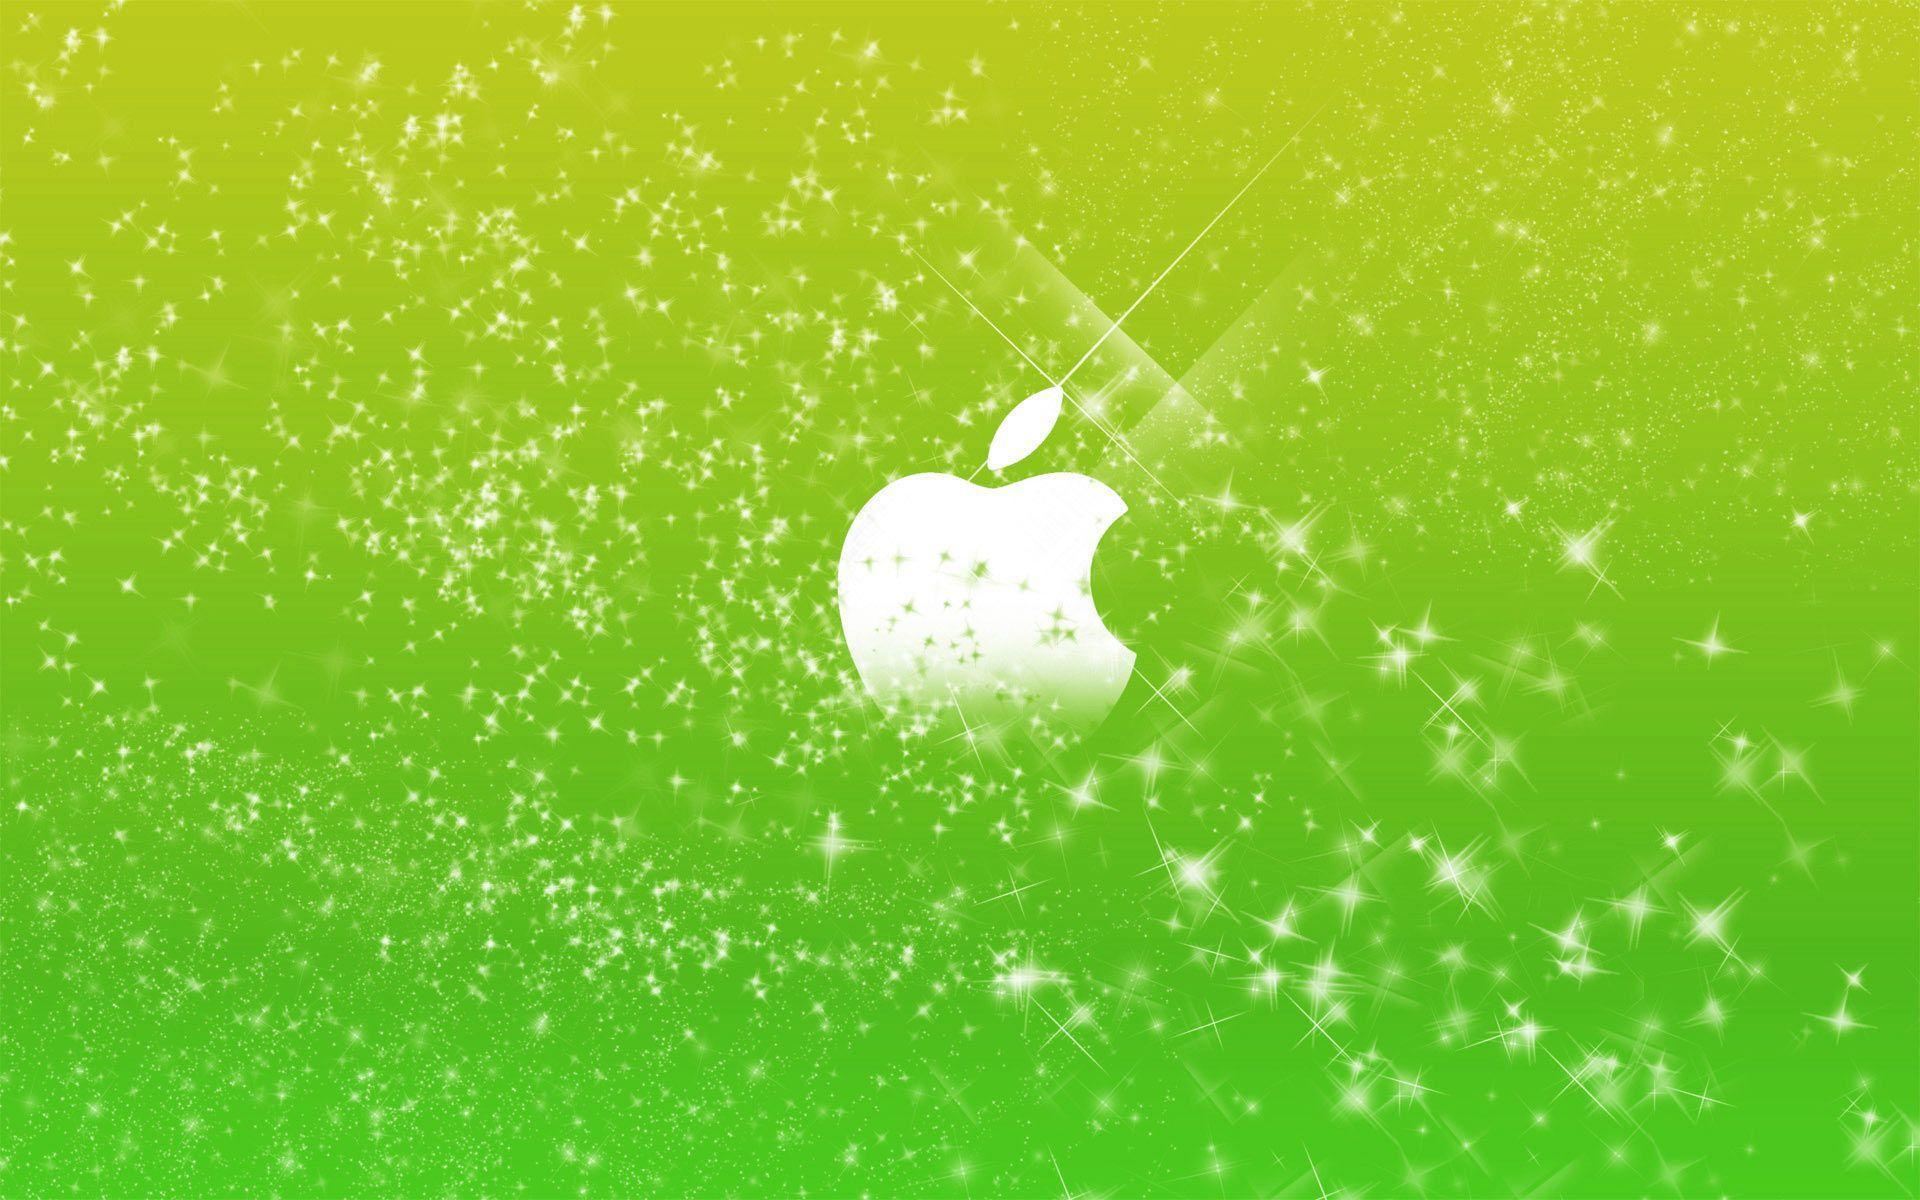 Green background for Mac Wallpaper. High Quality Wallpaper